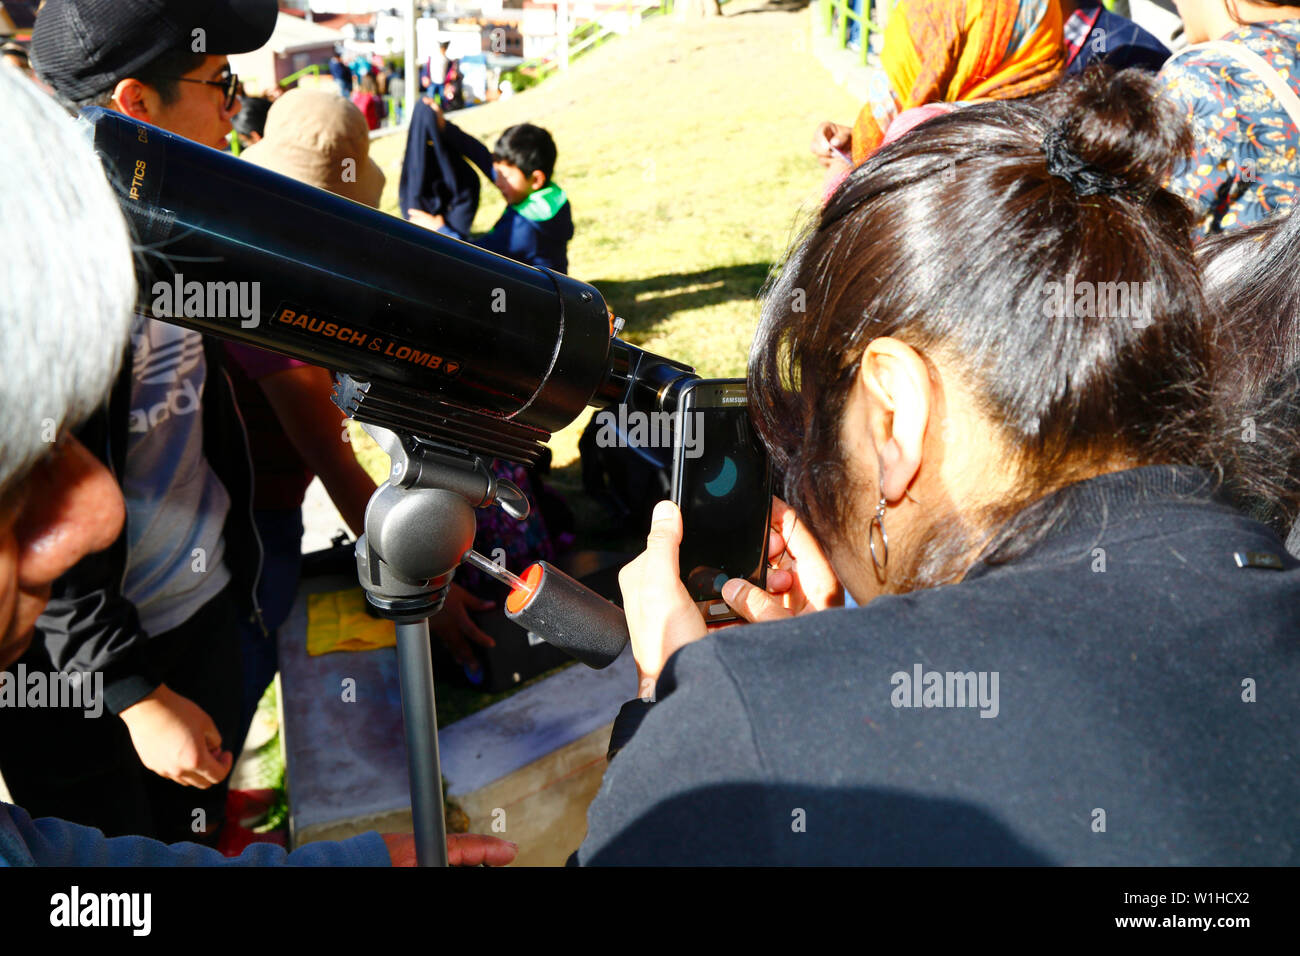 La Paz, Bolivia 2nd July 2019: A woman takes a photo of a partial eclipse of the sun using her mobile phone over a telescope eyepiece at an eclipse watching event near the city centre. In La Paz the eclipse lasted for about 2 hours 10 minutes with about 55% coverage at its maximum. Stock Photo